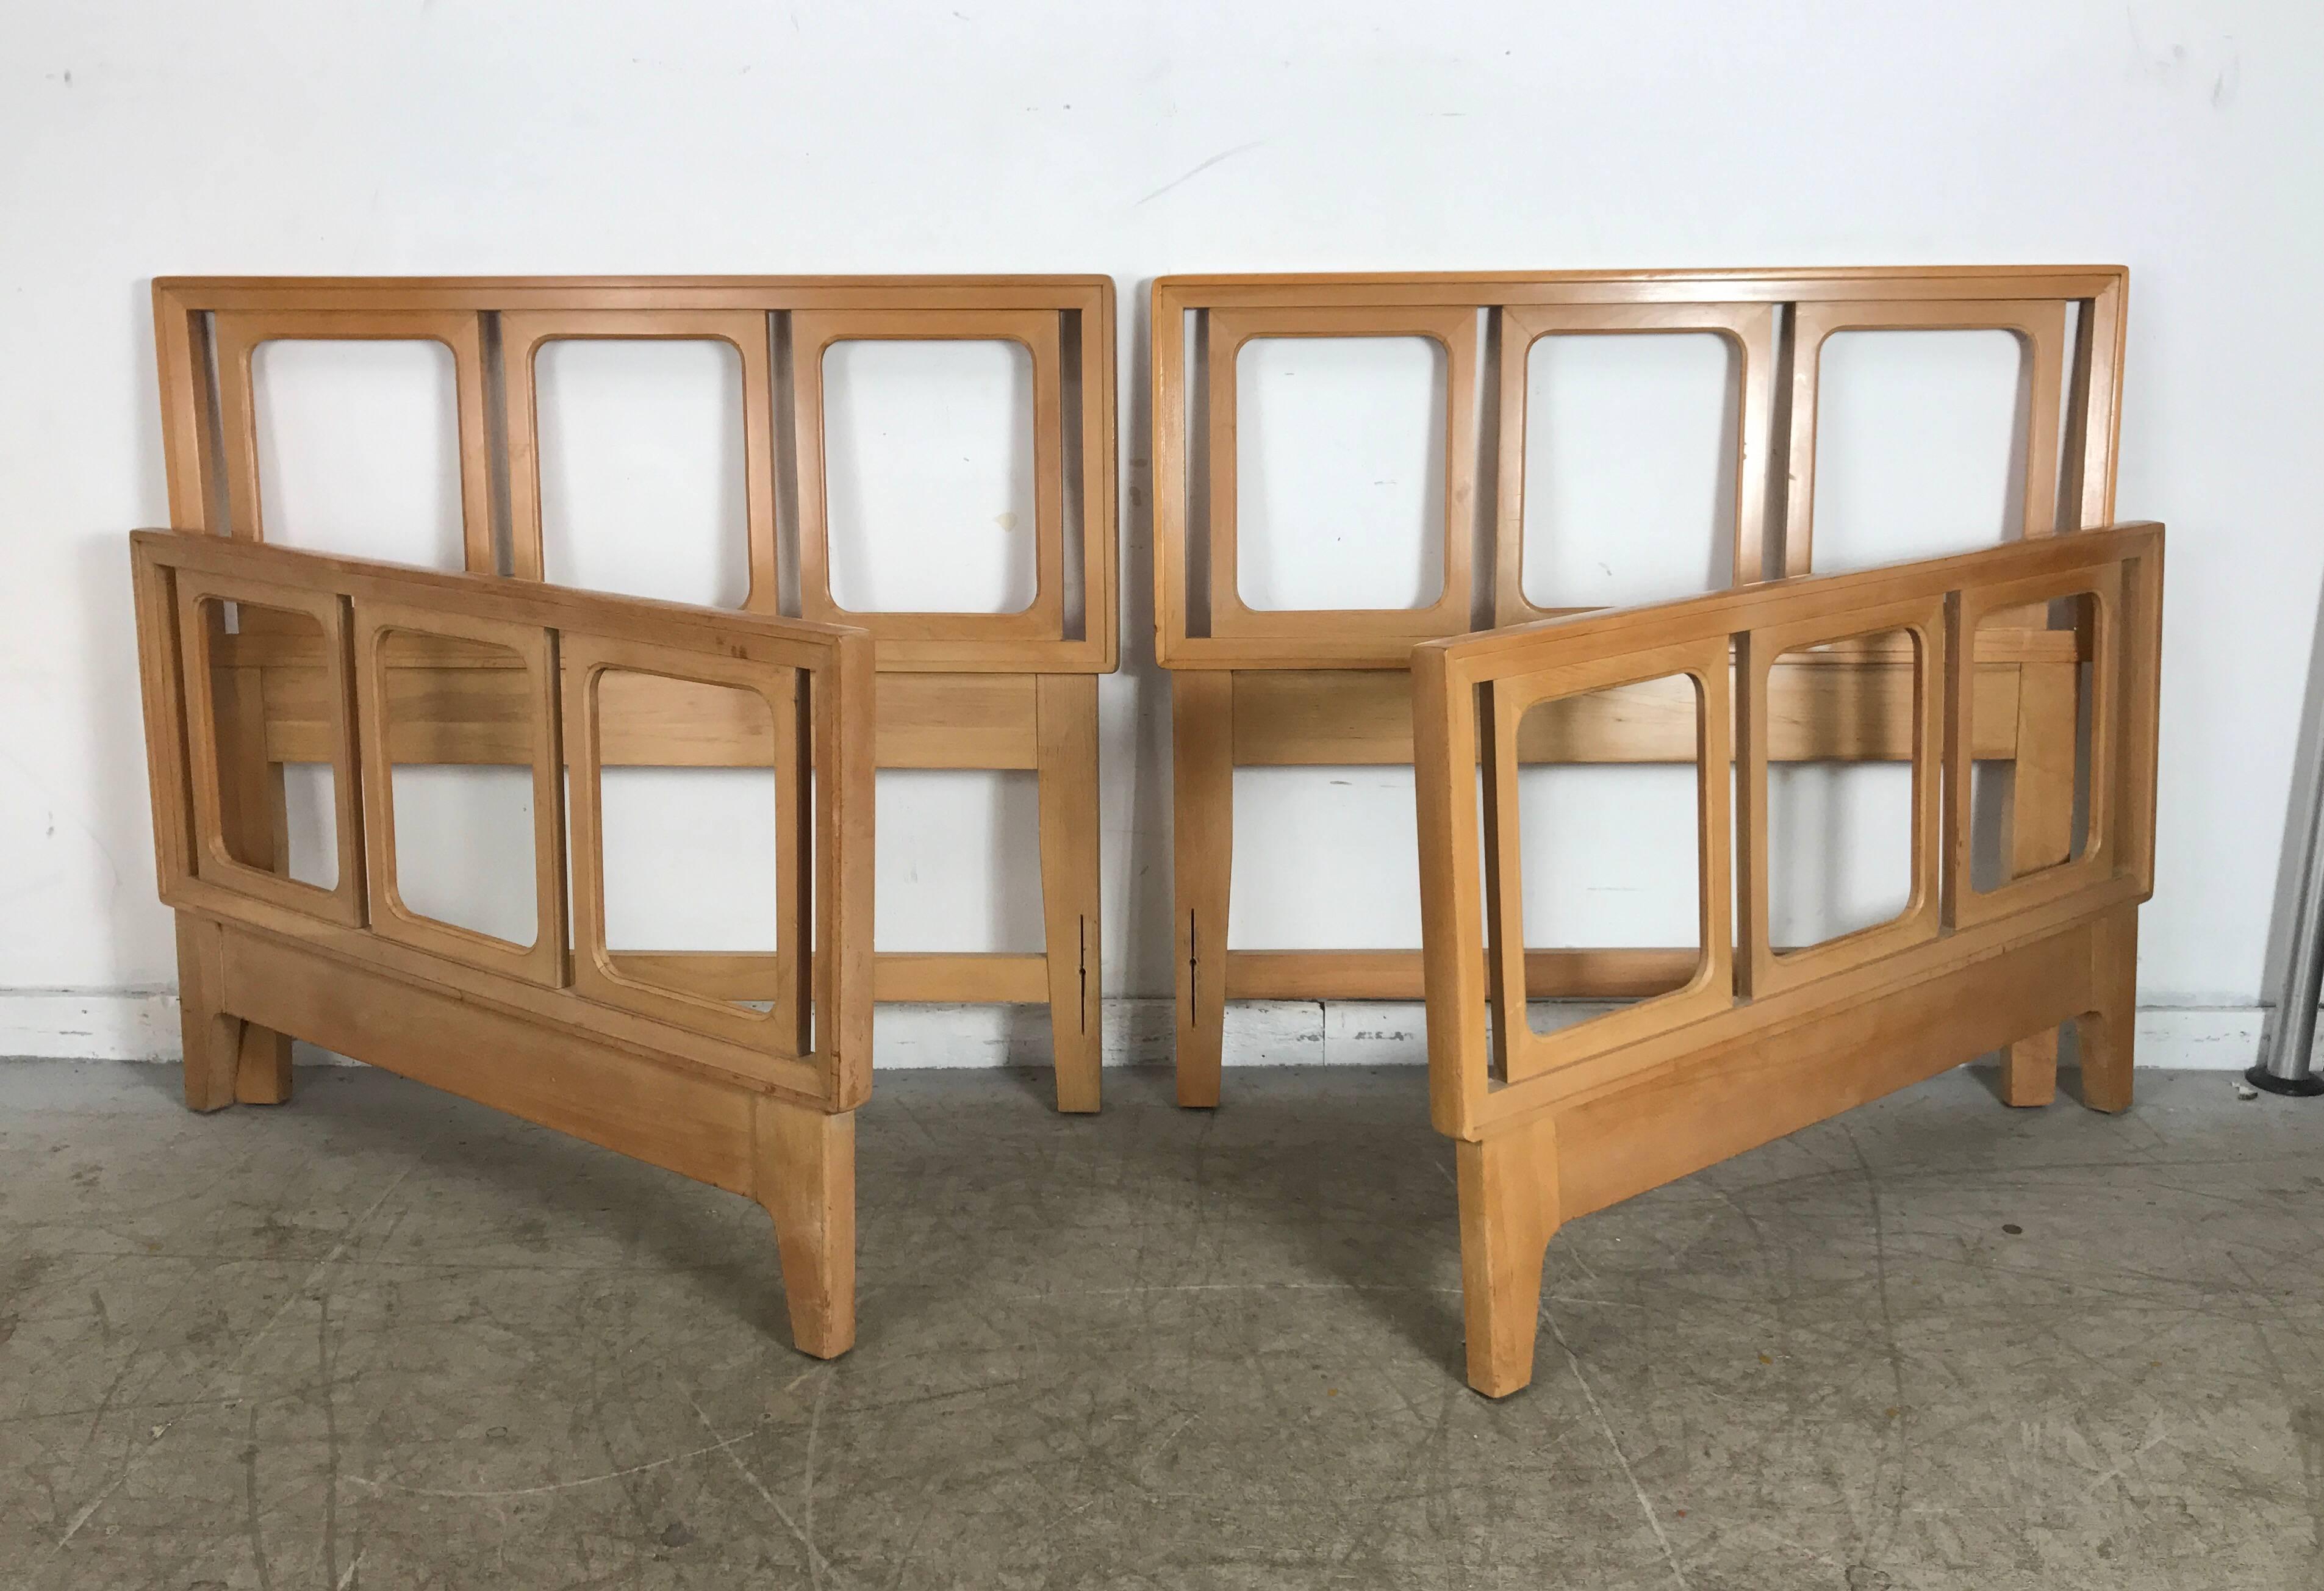 Pair of blonde mahogany twin beds by Edward Wormley for Drexel Precedent.